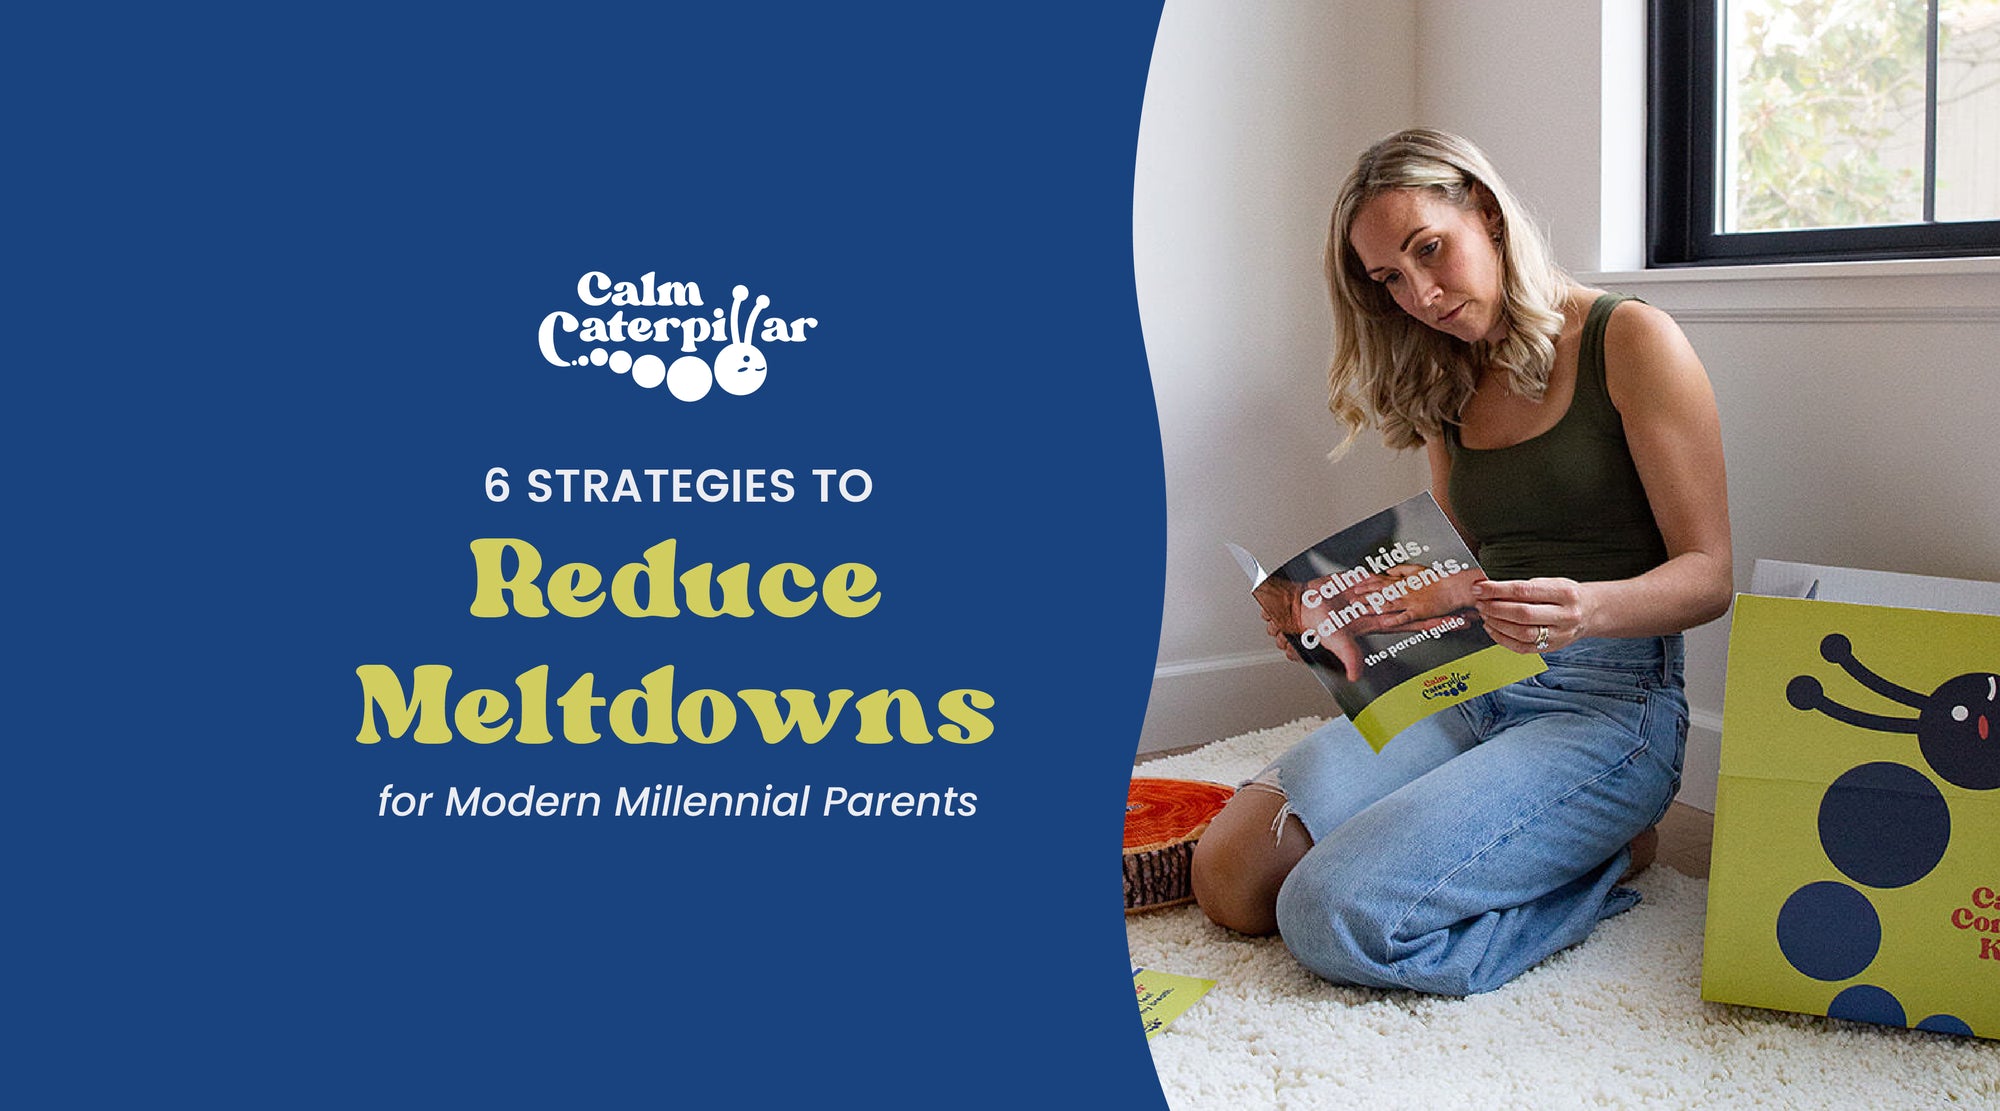 How to Reduce Meltdowns | 6 Strategies for Modern Millennial Parents